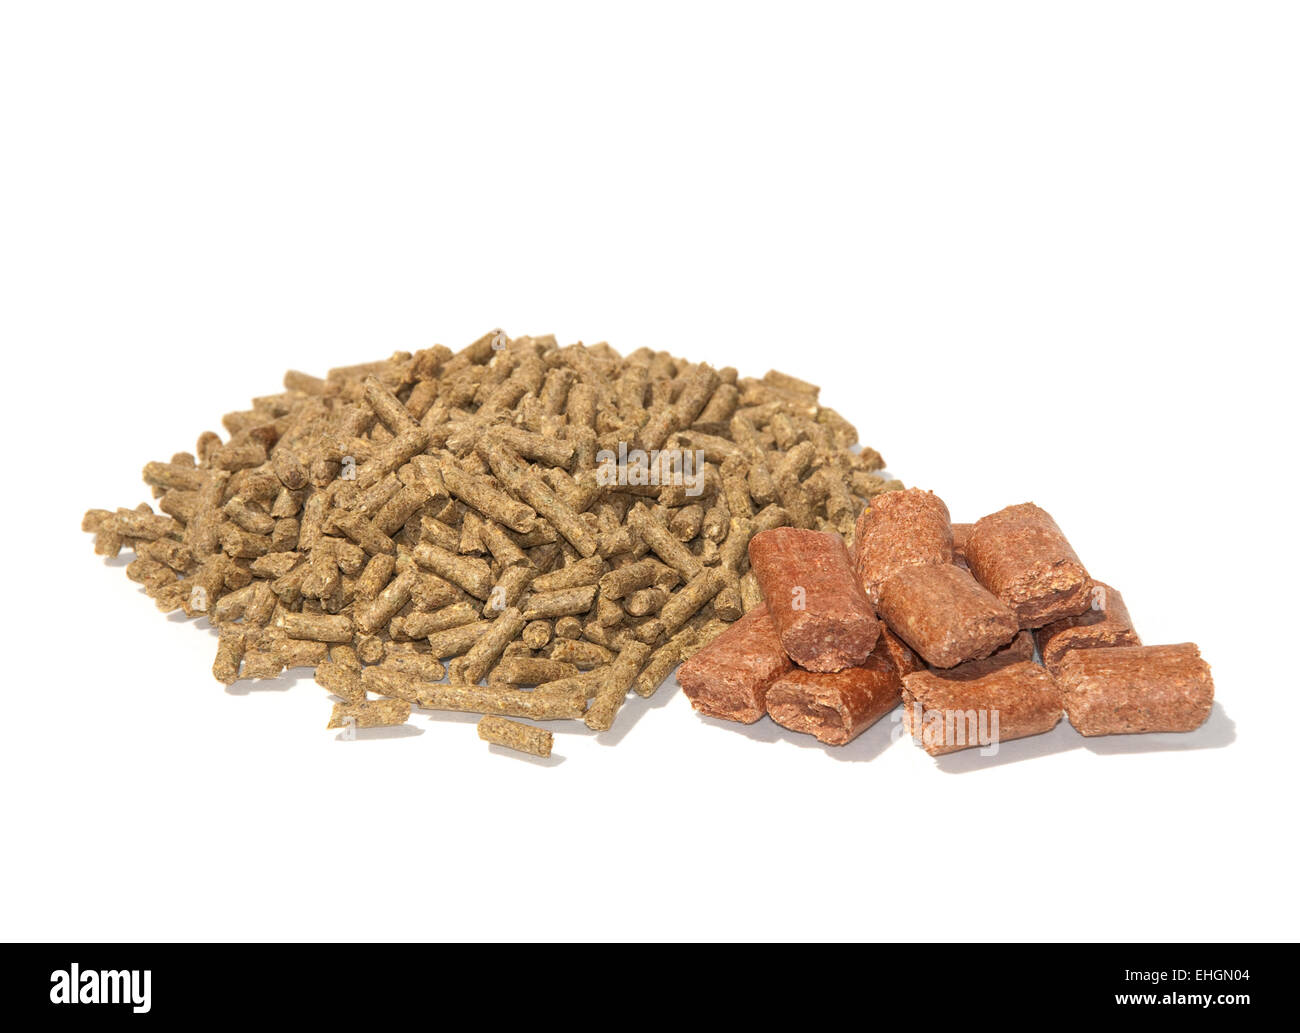 Pelleted horse feed and treats on white Stock Photo